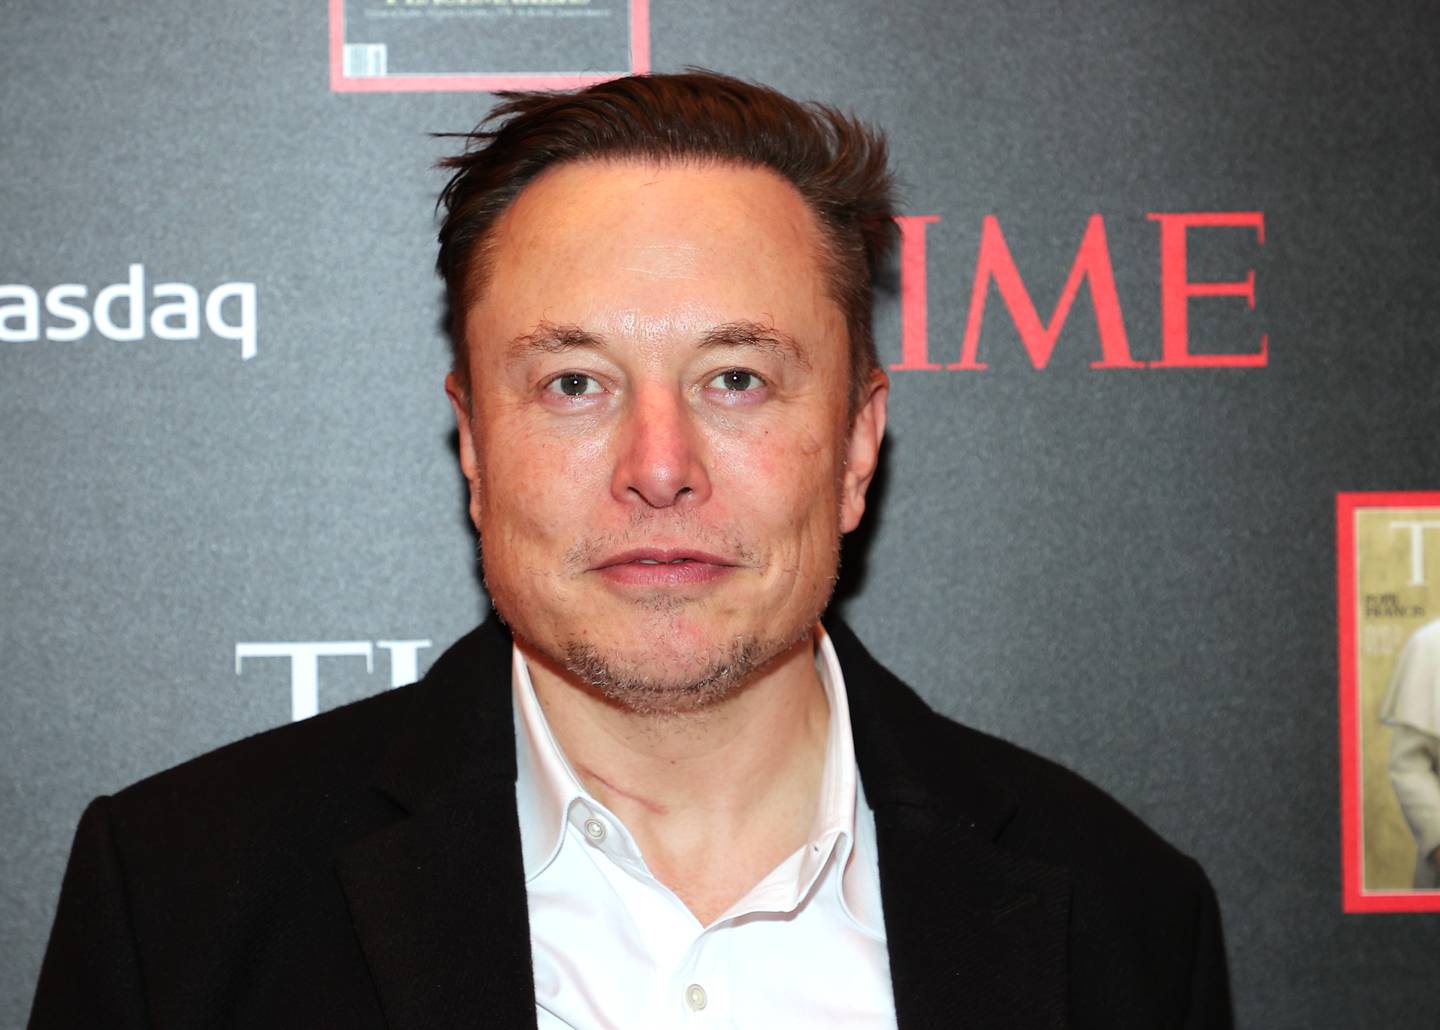 NEW YORK, NEW YORK - DECEMBER 13: Elon Musk attends TIME Person of the Year on December 13, 2021 in New York City.